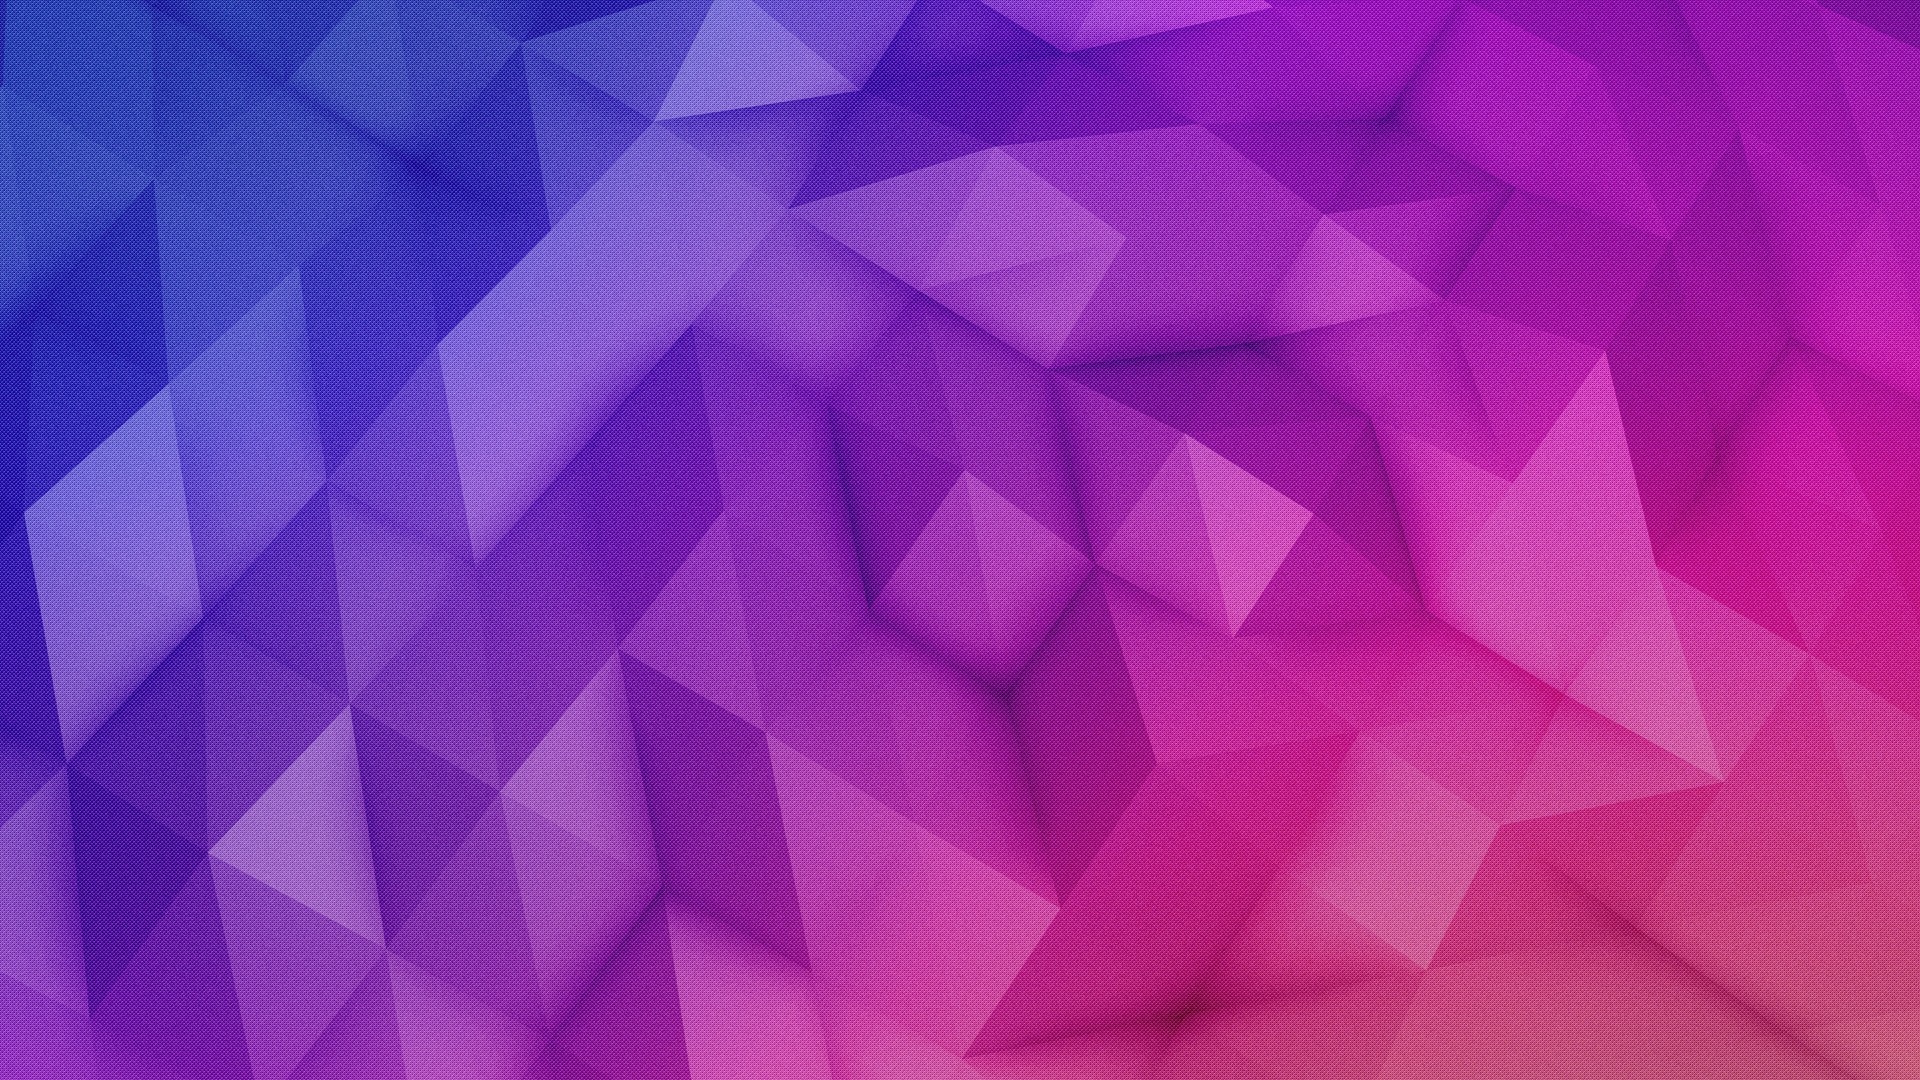 Abstract Geometric 1 1920x1080 wallpaper   1920x1080 Wallpapers